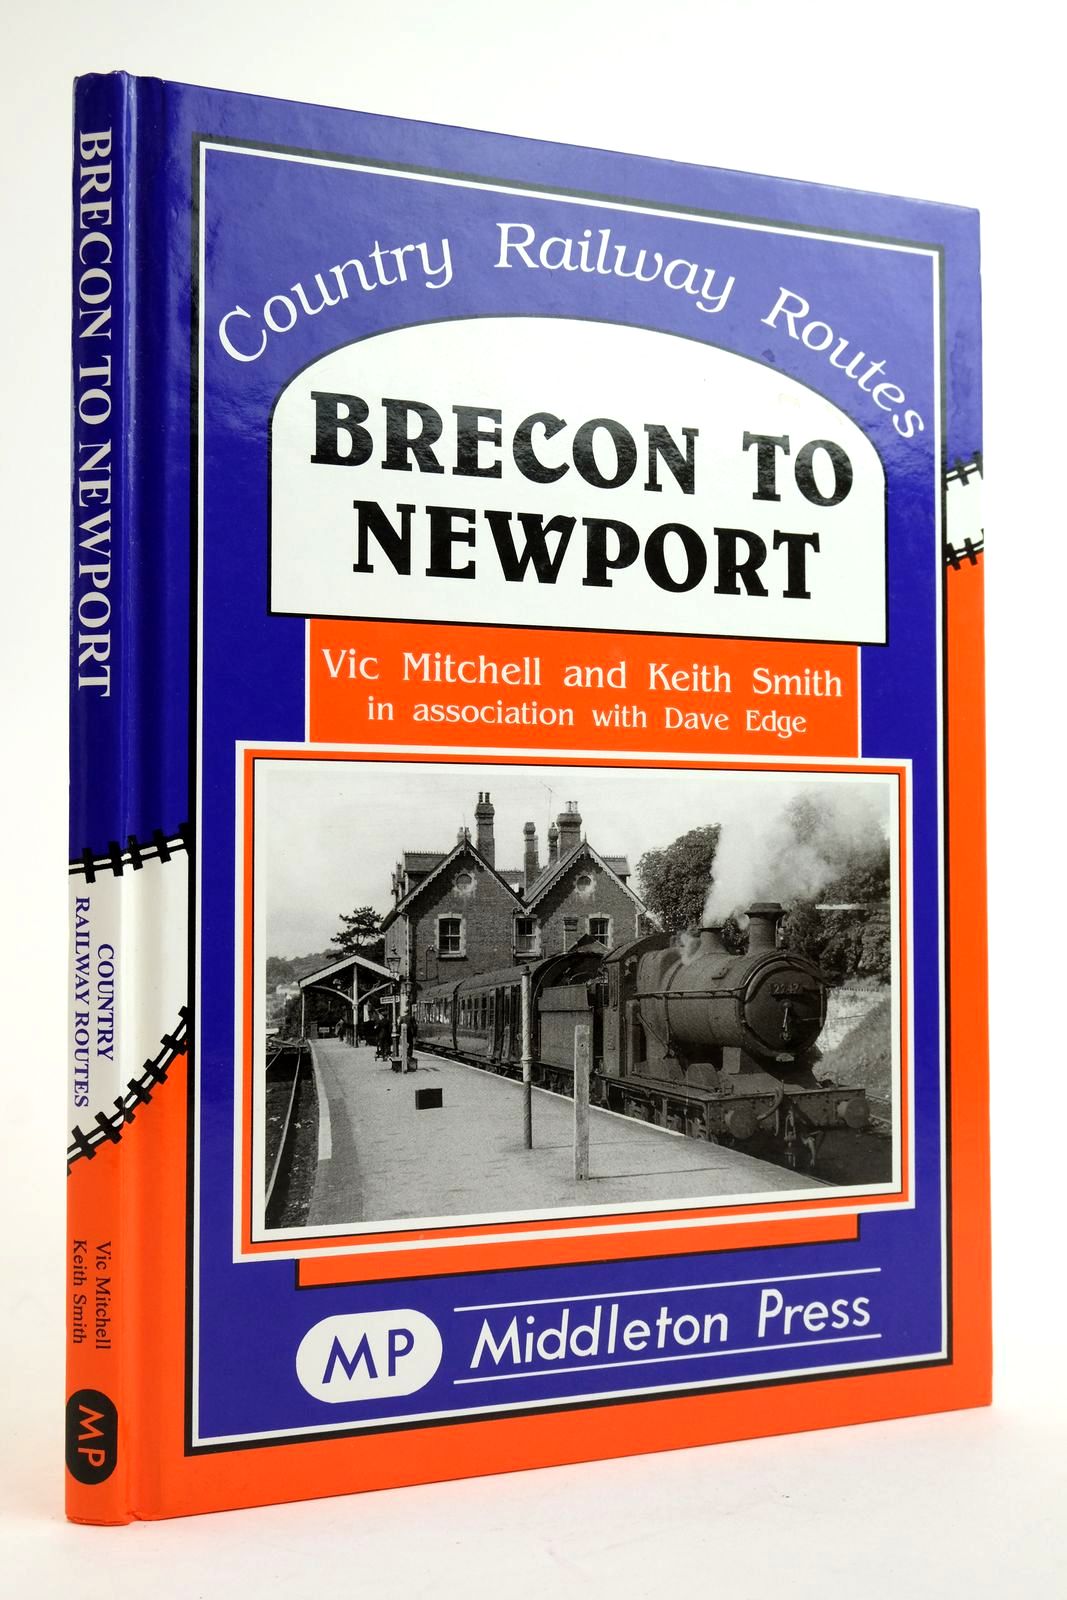 Photo of BRECON TO NEWPORT (COUNTRY RAILWAY ROUTES) written by Mitchell, Vic Smith, Keith Edge, Dave published by Middleton Press (STOCK CODE: 2135446)  for sale by Stella & Rose's Books